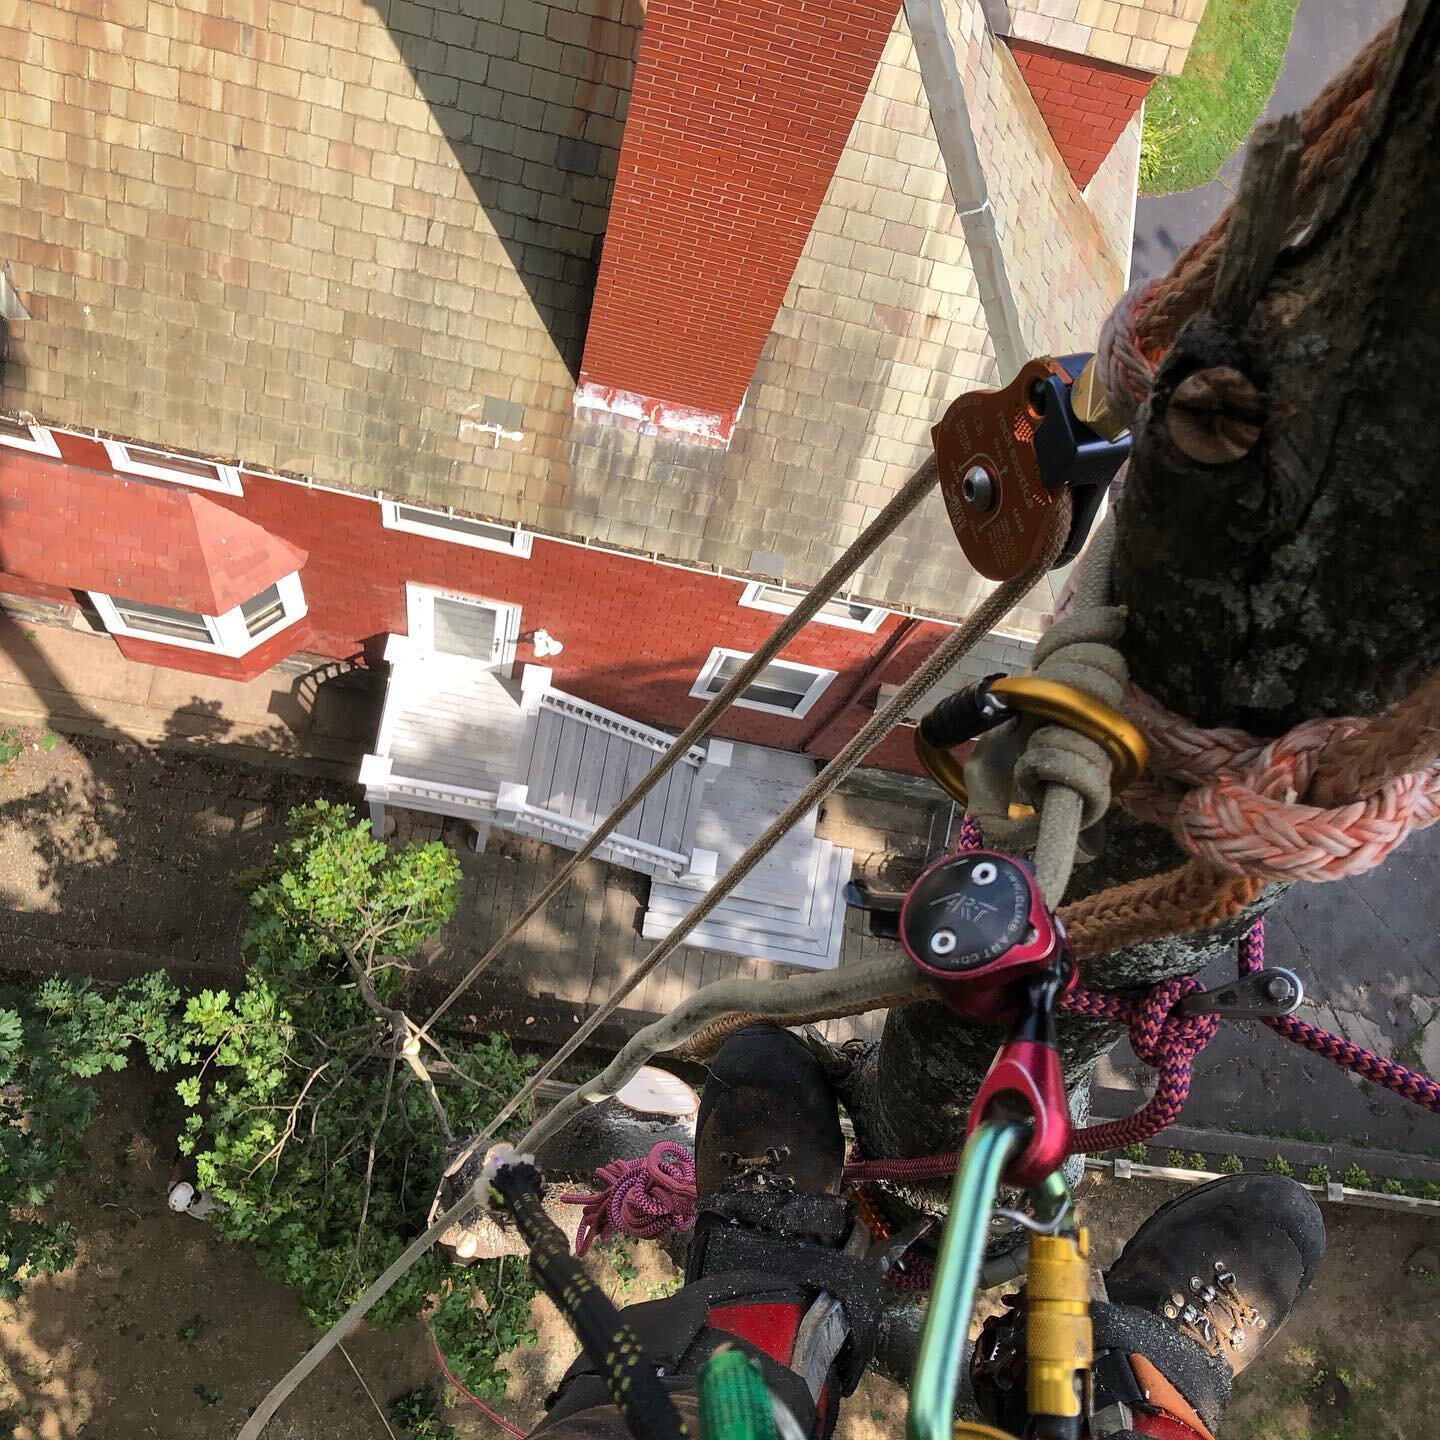 Yesterday&rsquo;s jobs with @dirigotreeservice : Norway maple removal in Portland on a fence line and Nathaniels first crane removal in Yarmouth. #arborist #cranework #treeremoval #rigging #treeclimber #roperunner #yalecordage #norwaymaple